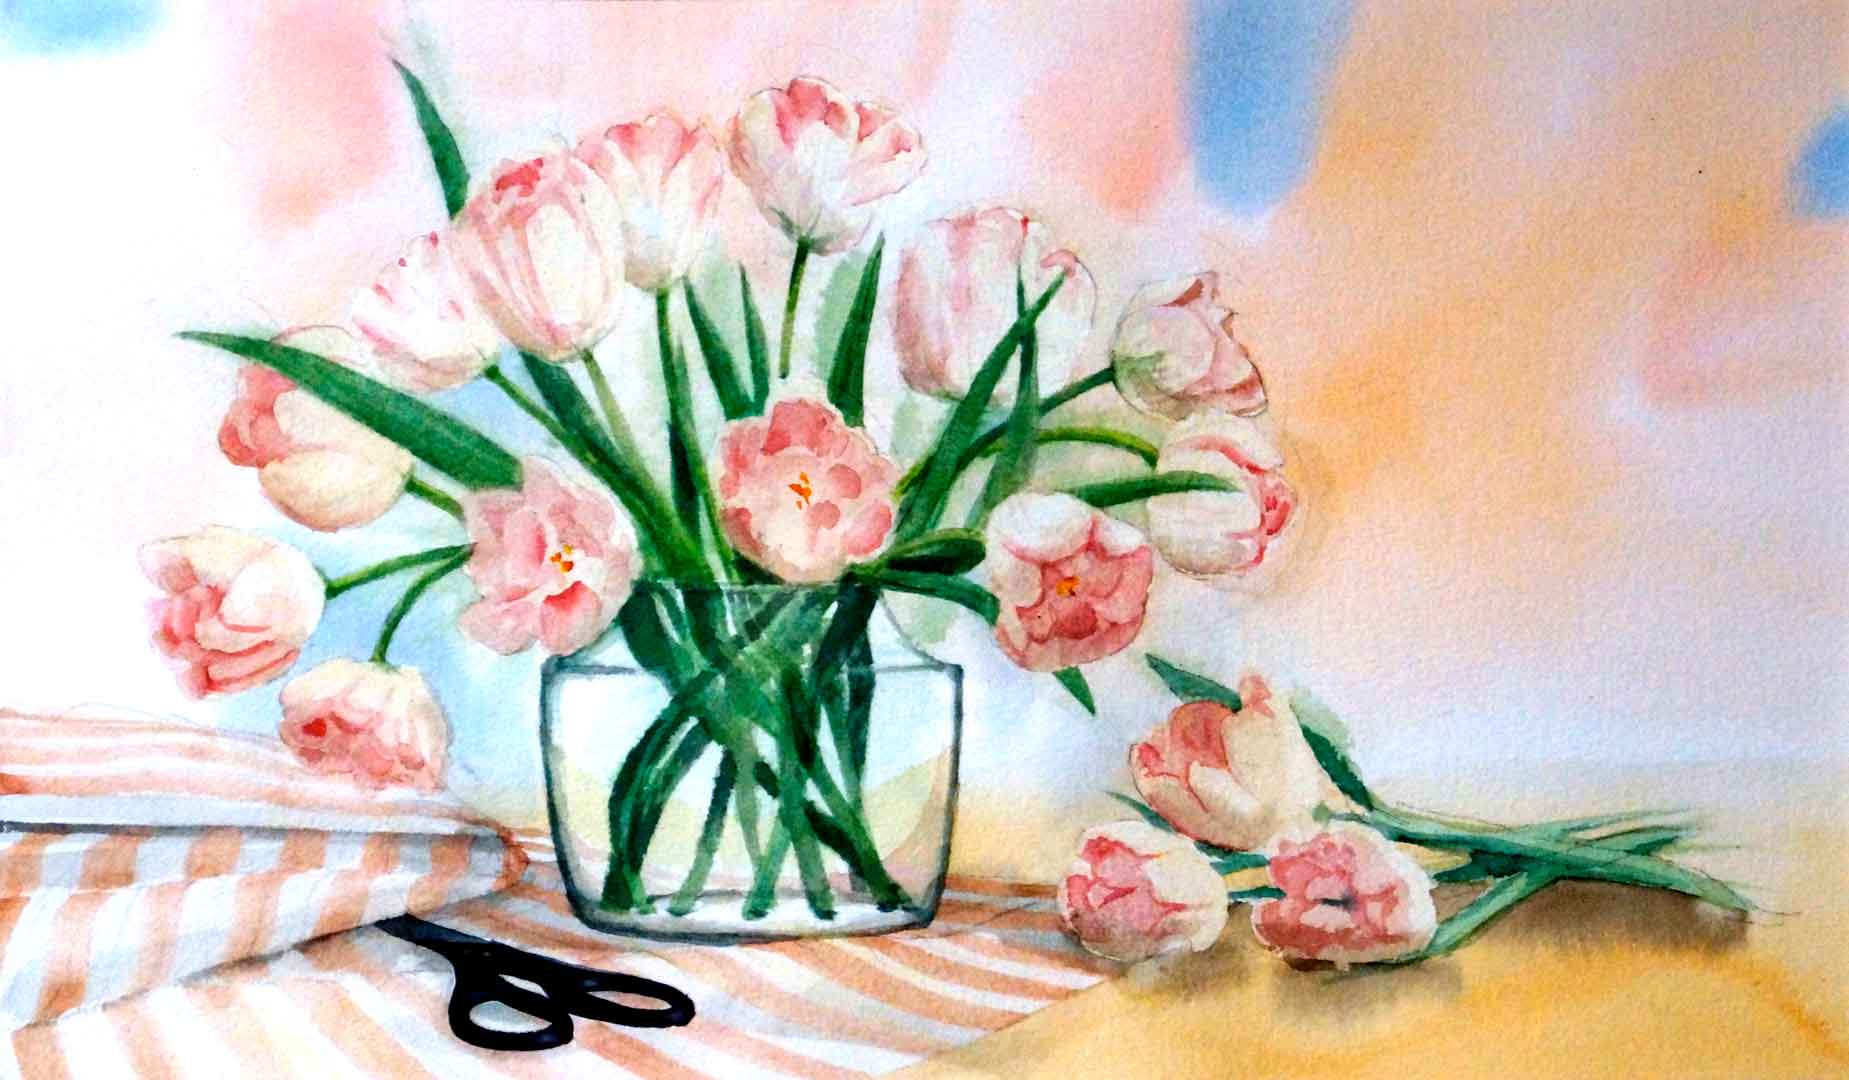 Tulips, Watercolor on paper, 20 x 13